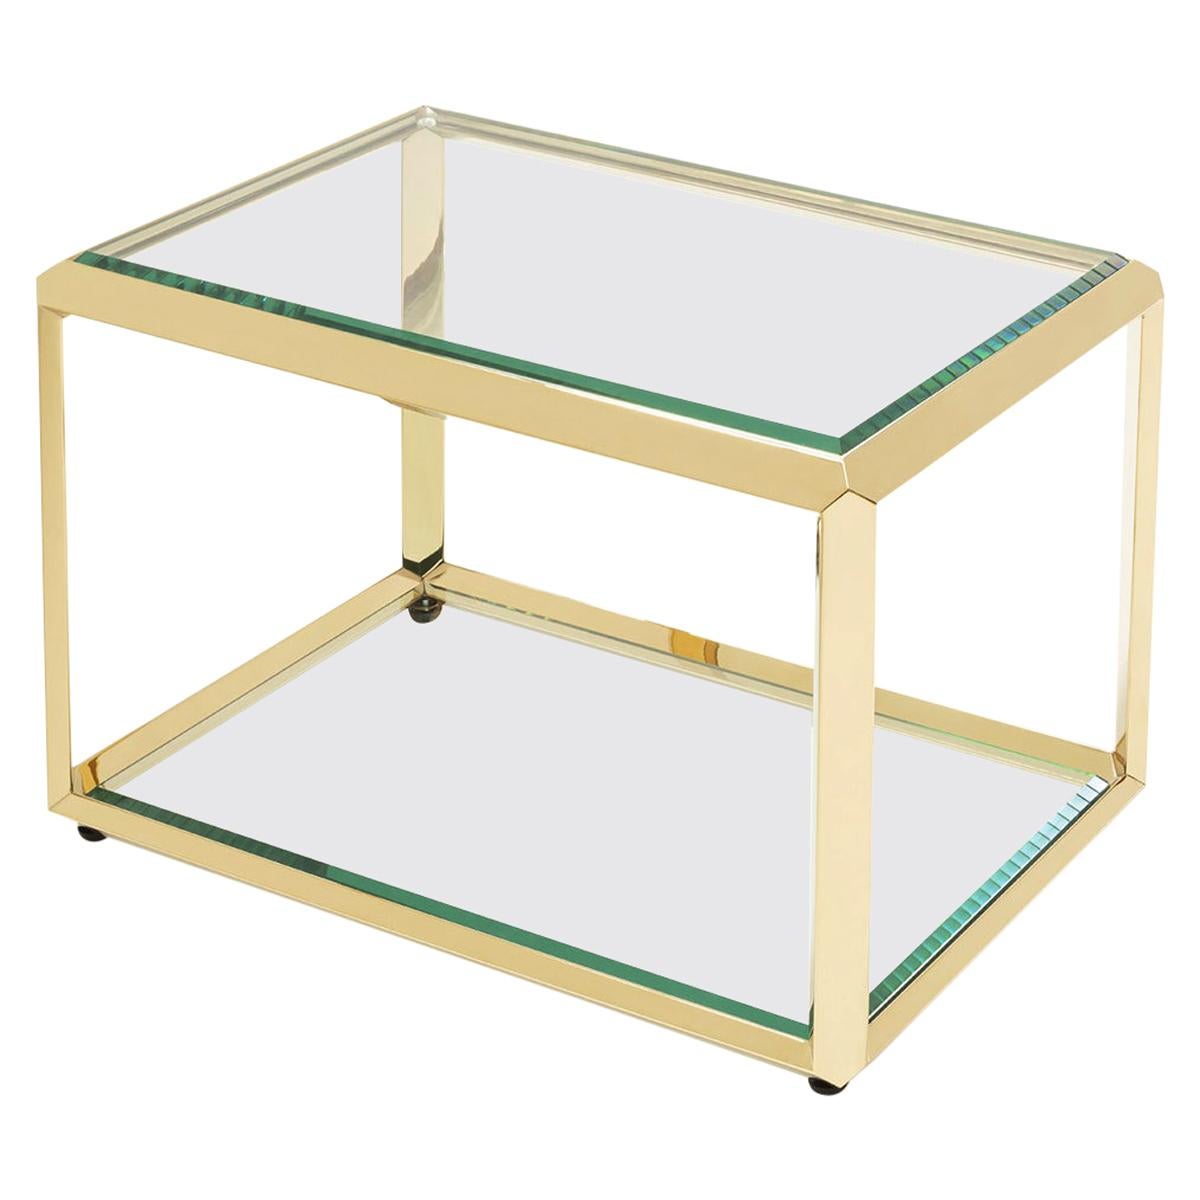 Table d'appoint Casiopee Gold en finition or